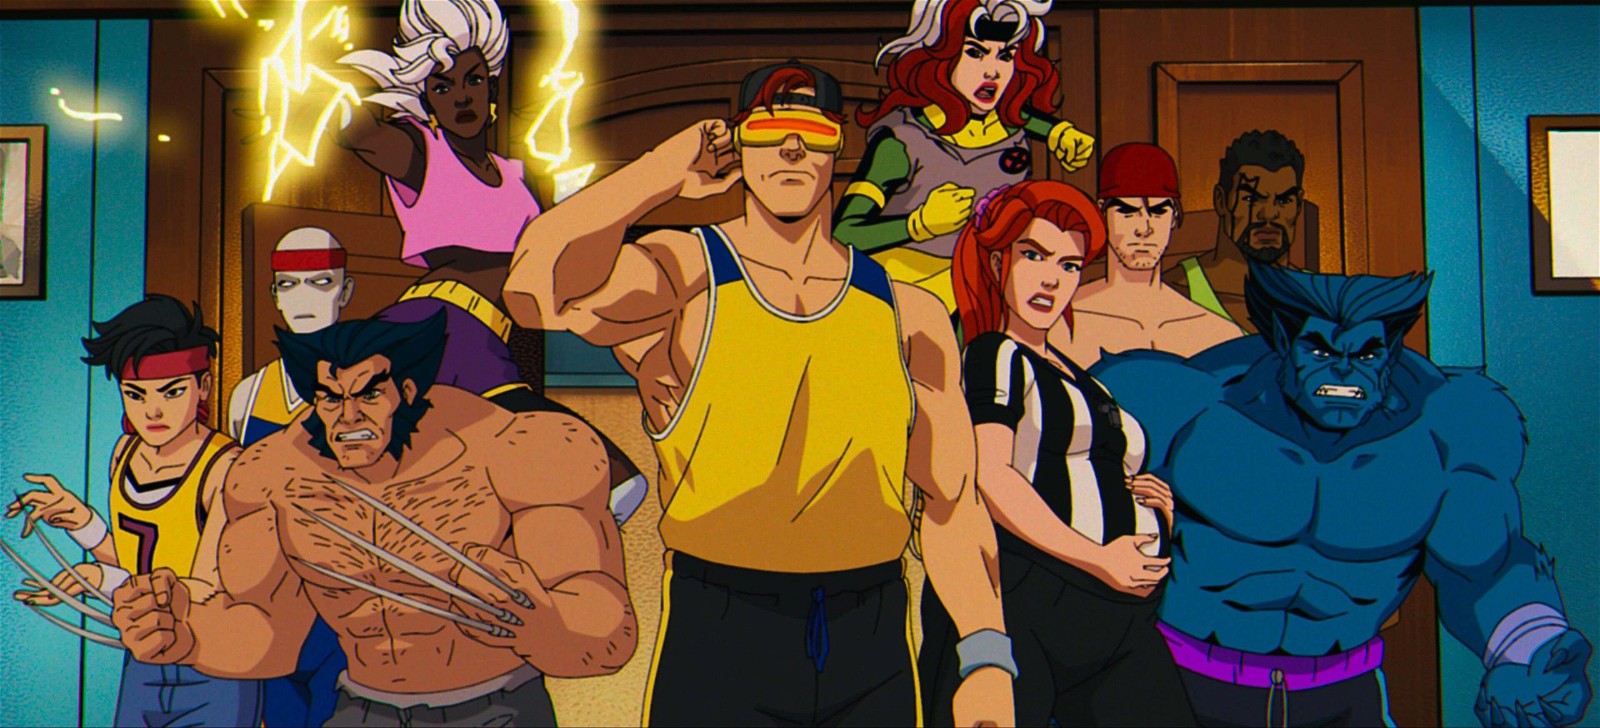 X-Men '97 is the most perfect animated show